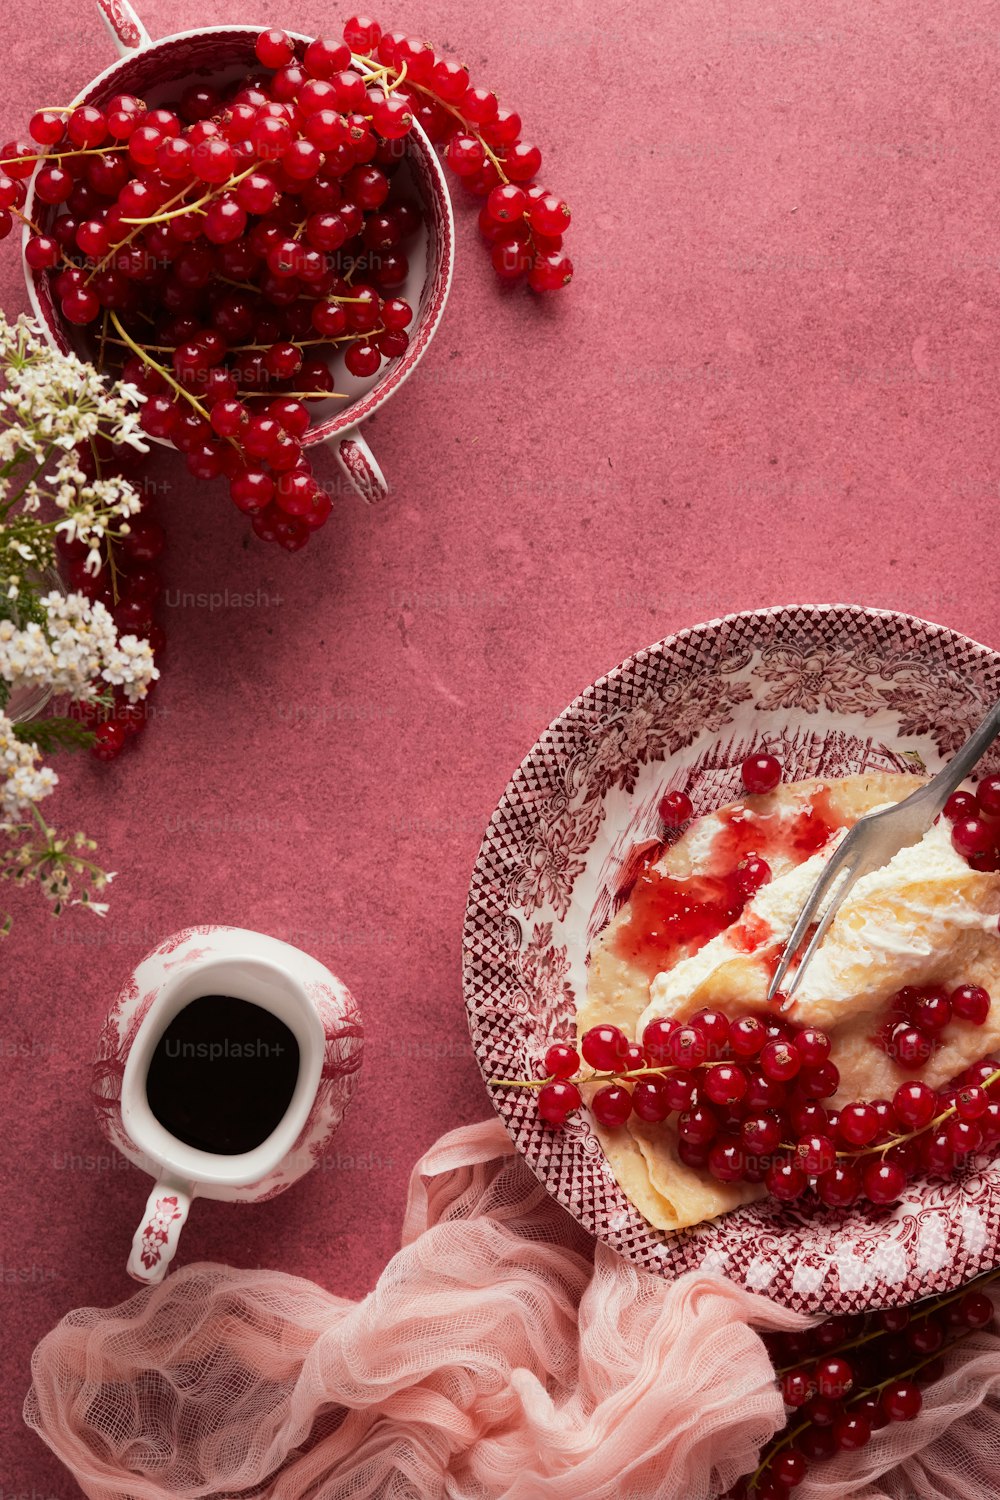 a plate of cake with cherries and a cup of coffee